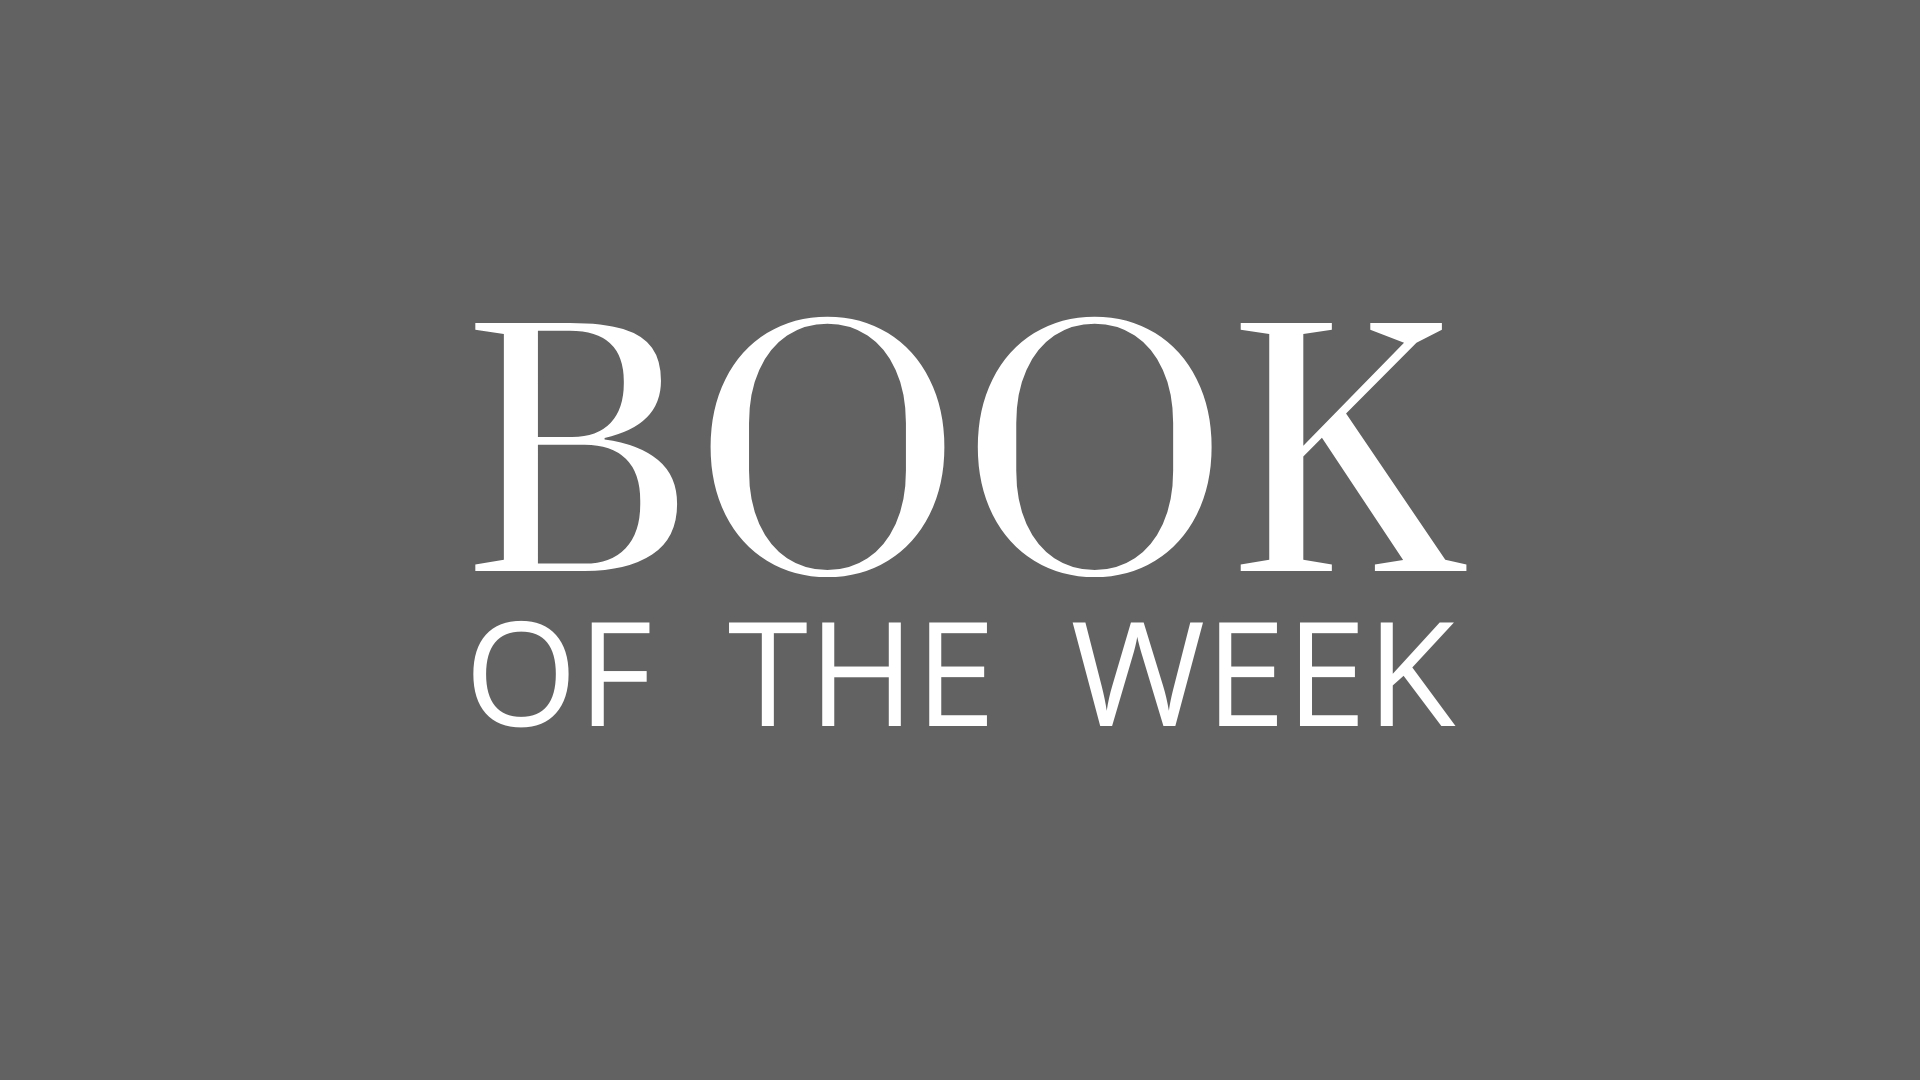 Book of the Week: The Gifts of Imperfection